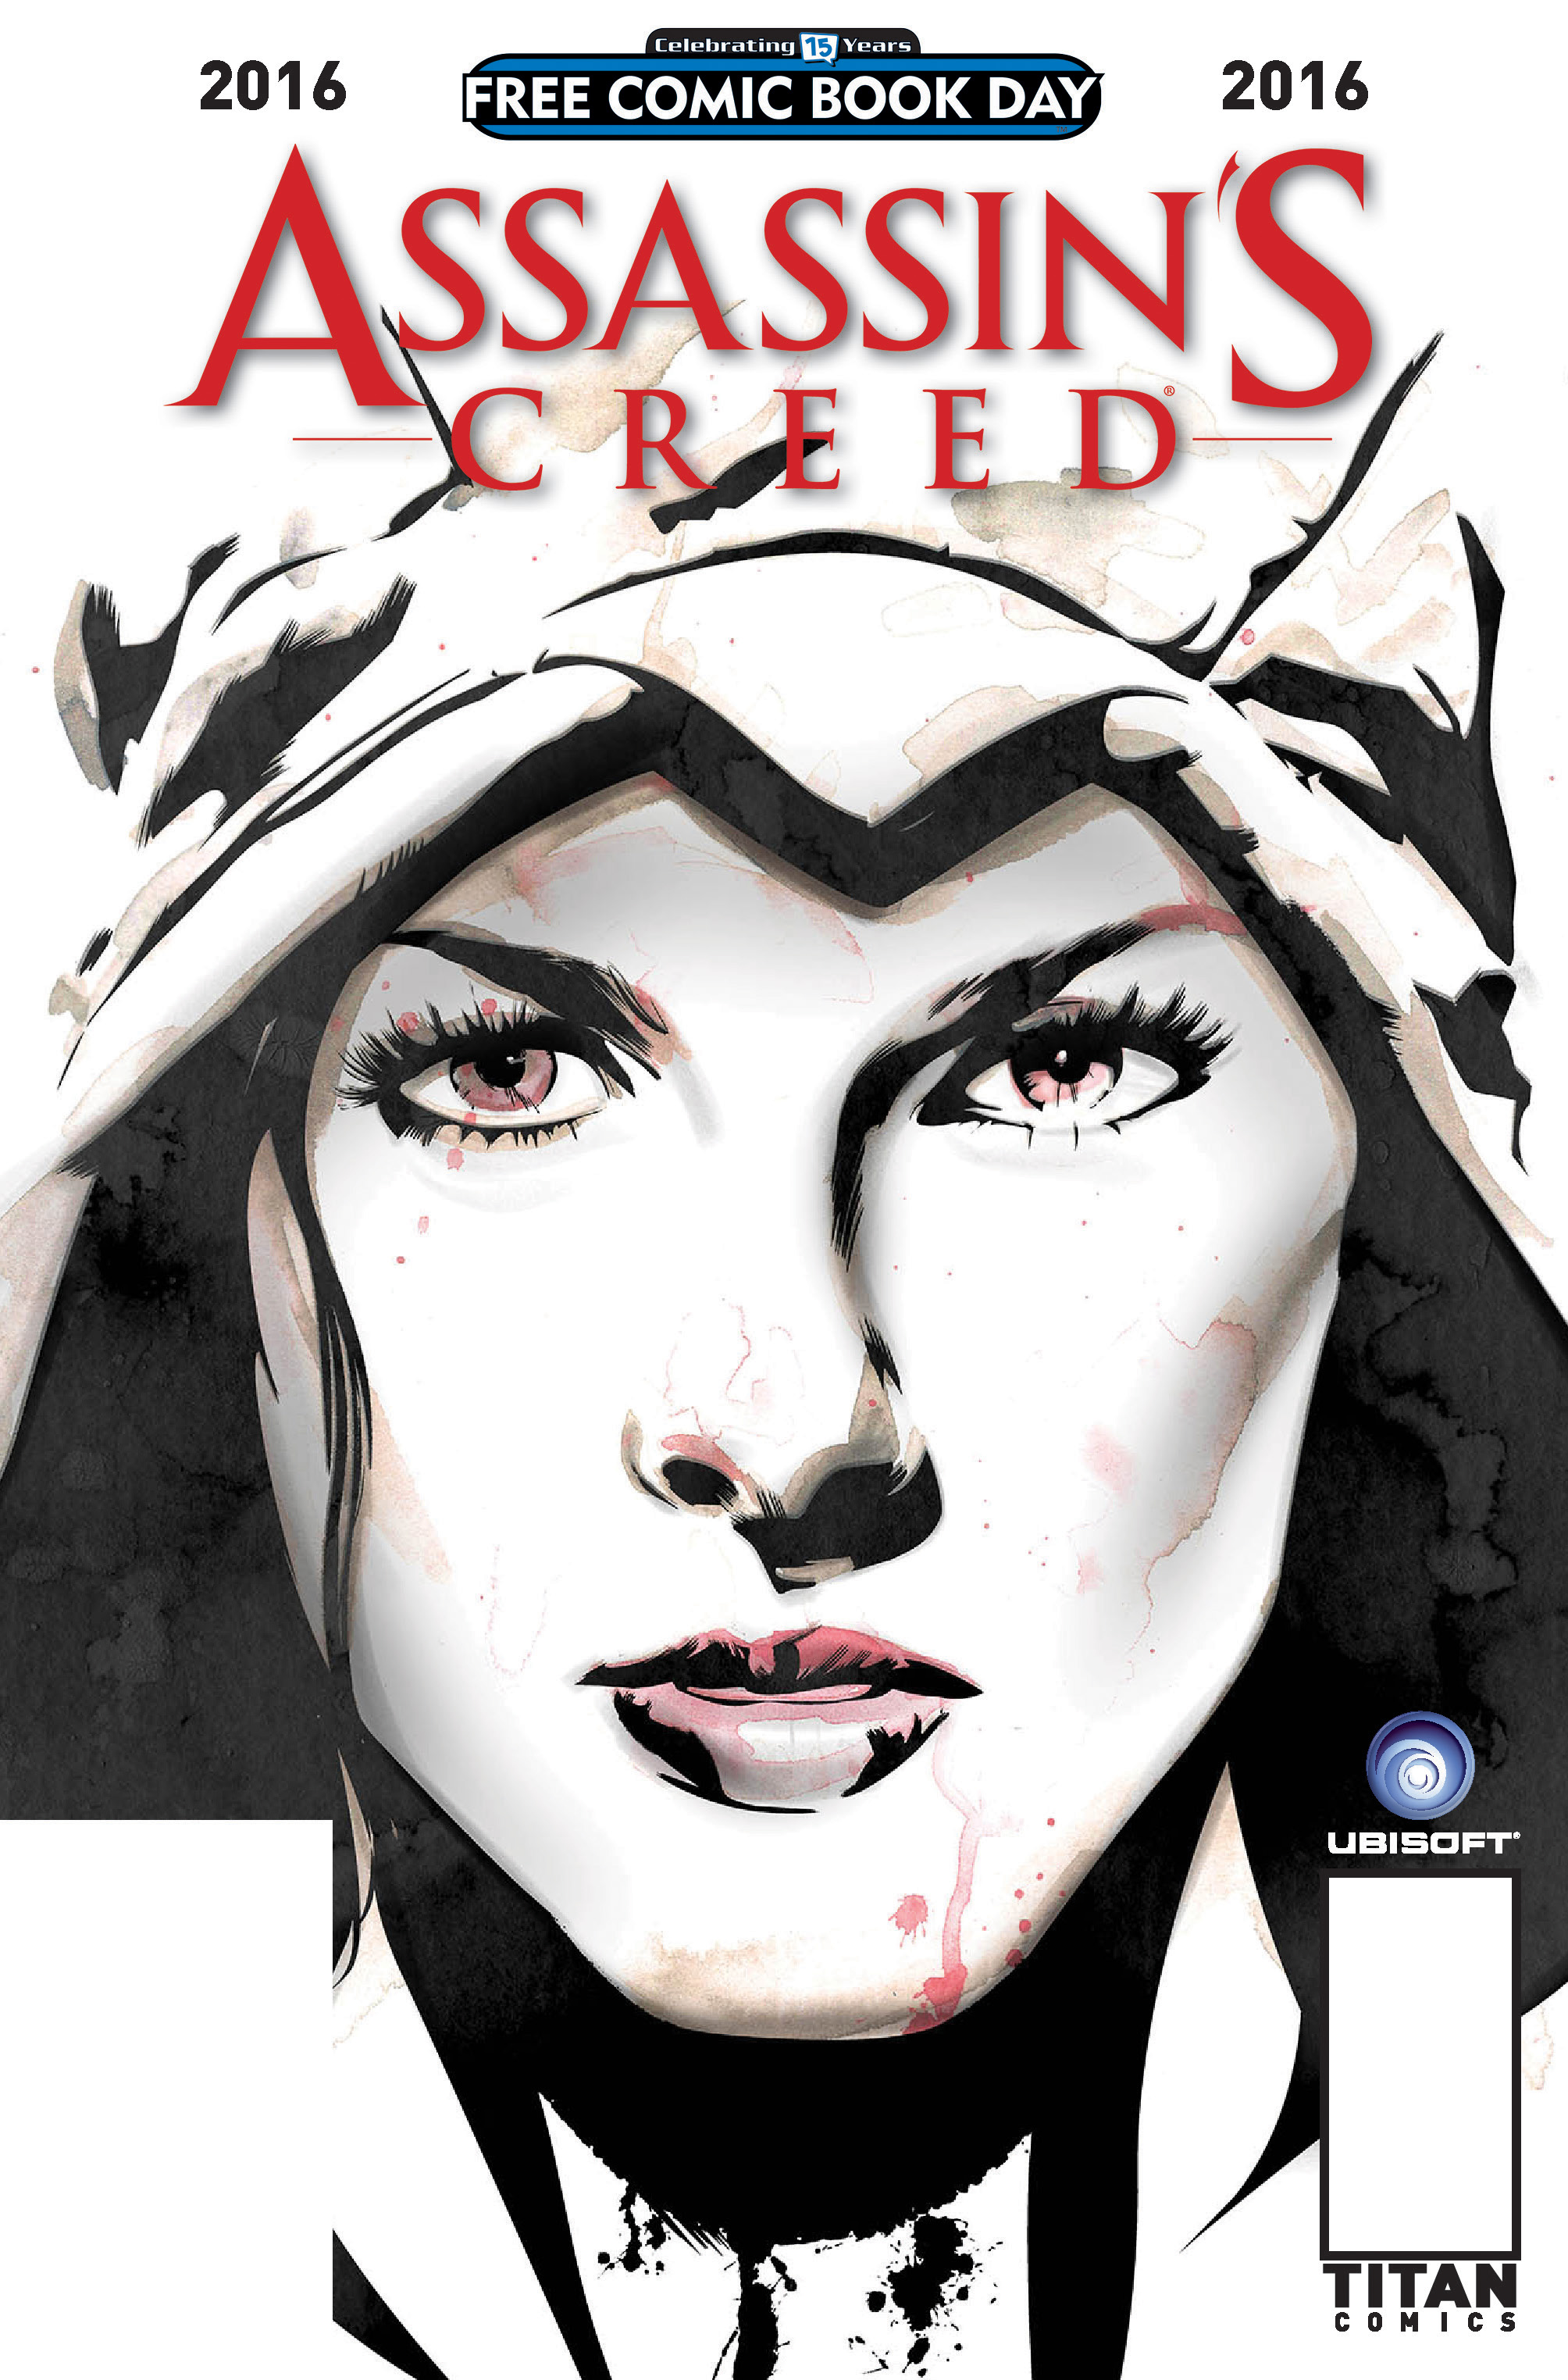 Assassin's Creed Free Comic Book Day 2016 Cover